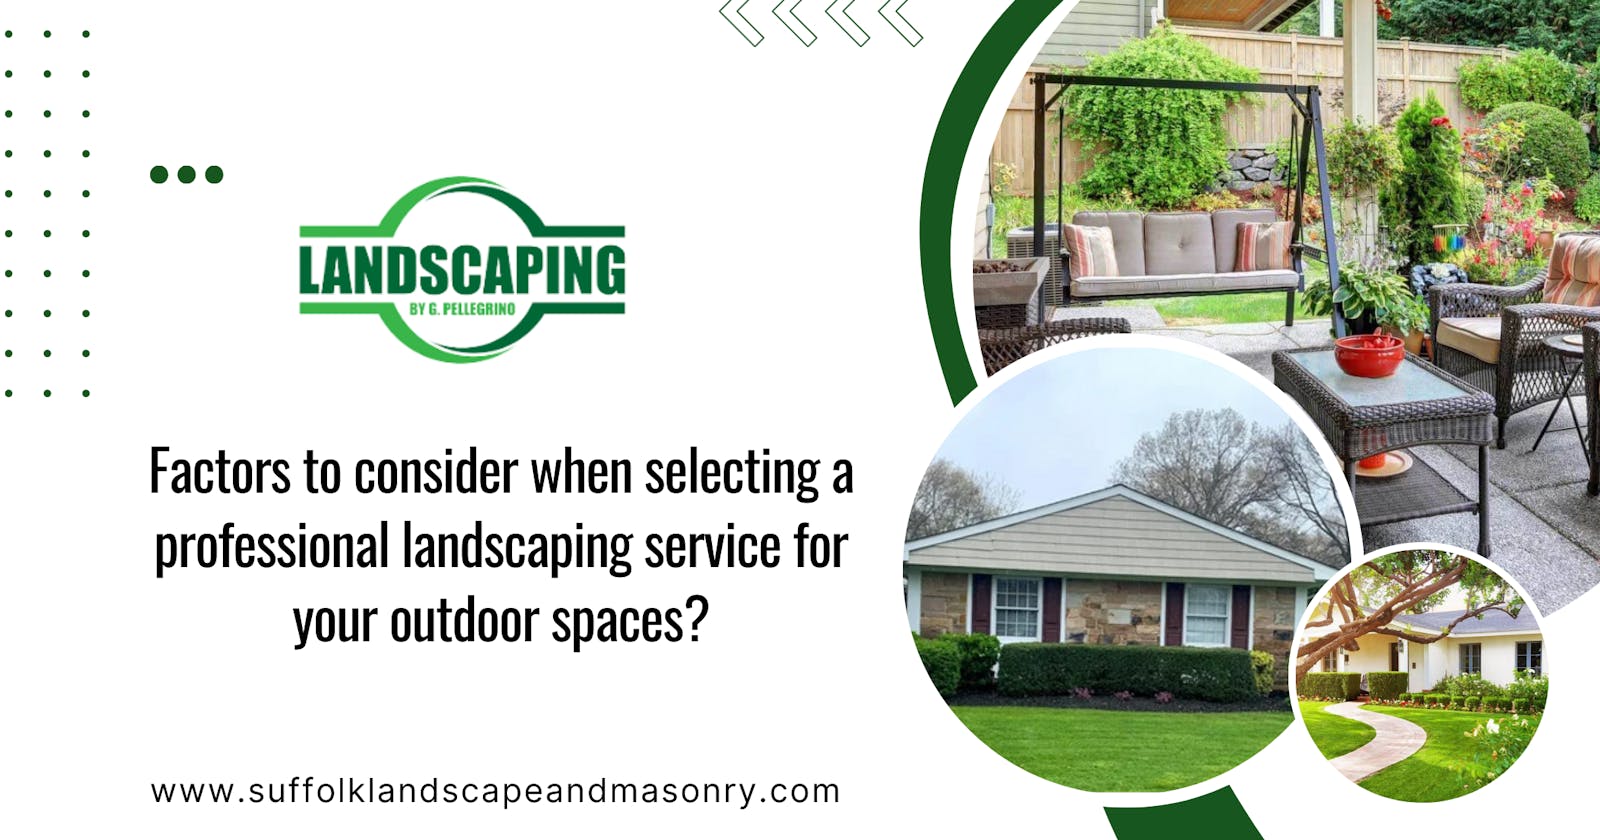 Factors to consider when selecting a professional landscaping service for your outdoor spaces?